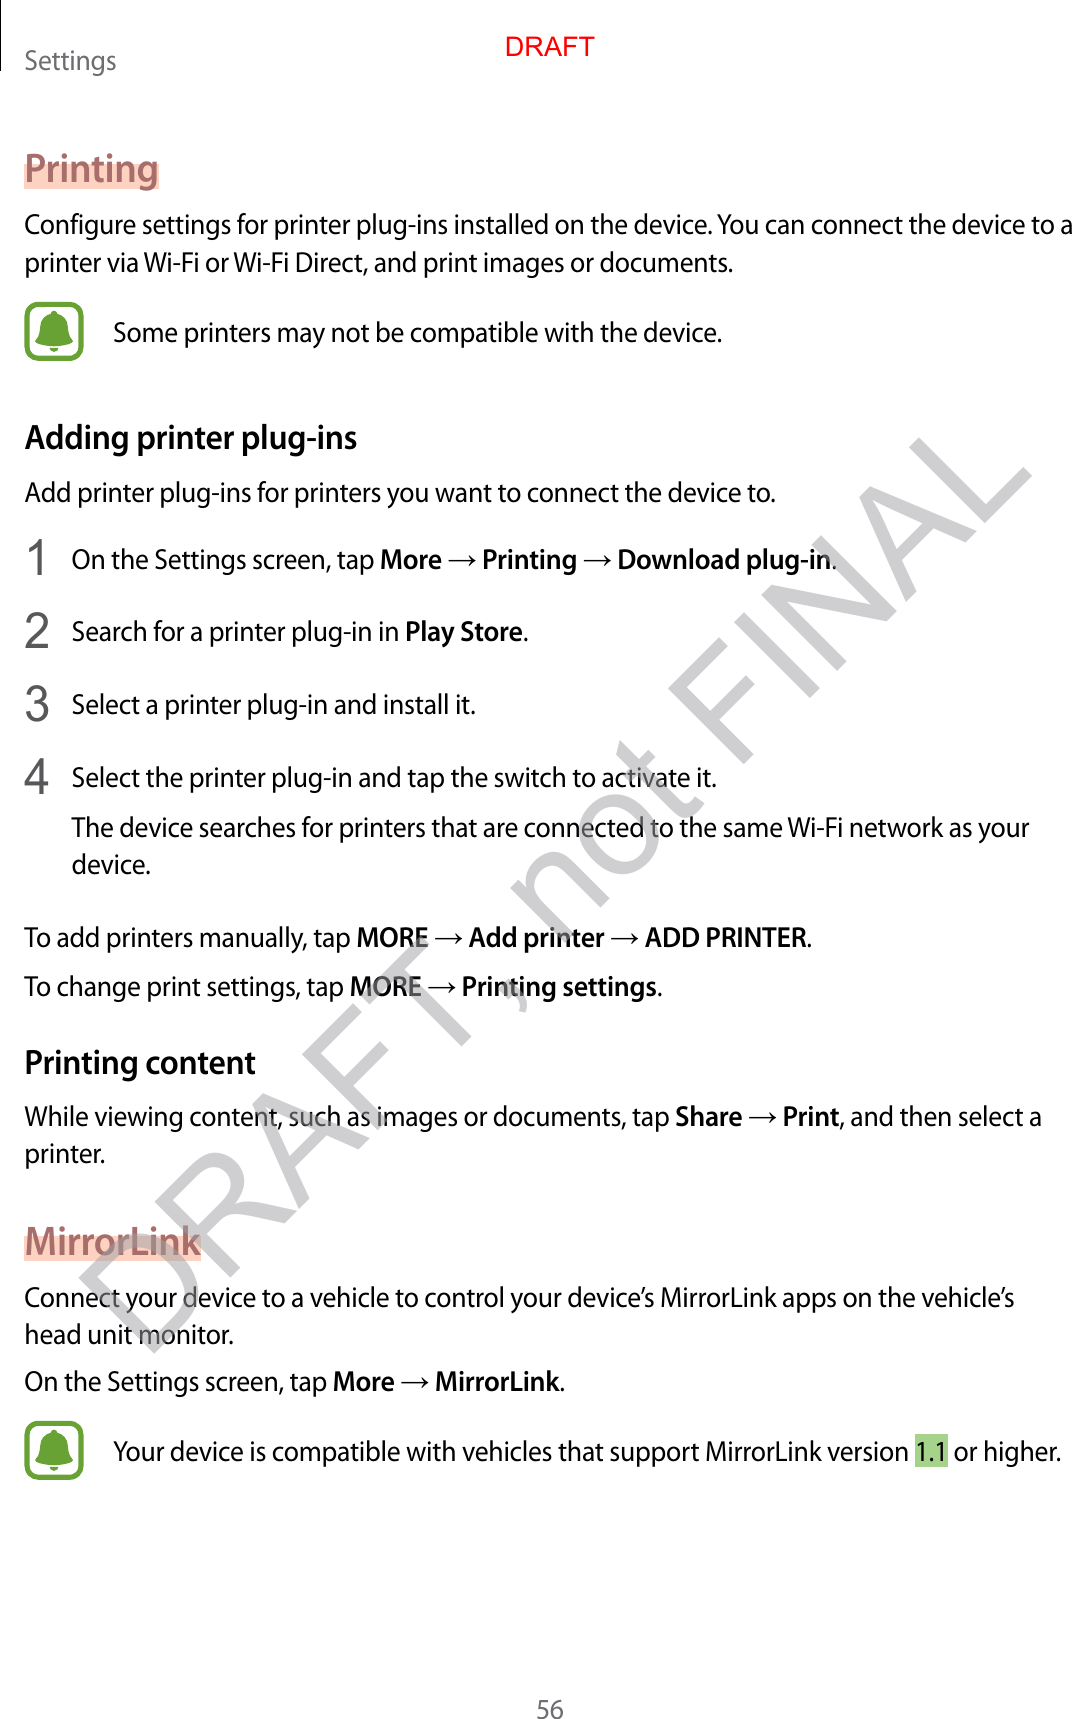 Settings56PrintingConfigur e settings f or print er plug-ins installed on the device. You can connect the device to a printer via Wi-Fi or  Wi-Fi Dir ect, and print images or documents .Some printers may not be compa tible with the device .Adding prin ter plug-insAdd print er plug-ins f or printers y ou w ant t o connect the device to.1  On the Settings screen, tap More → Printing → Download plug-in.2  Search for a print er plug-in in Play St or e.3  Select a printer plug-in and install it.4  Select the printer plug-in and tap the switch t o activate it.The device sear ches f or print ers that ar e c onnected to the same Wi-Fi network as y our device.To add printers manually, tap MORE → Add prin ter → ADD PRINTER.To change print settings, tap MORE → Printing settings.Prin ting c ont entWhile viewing cont ent , such as images or documents , tap Share → Print, and then select a printer.MirrorLinkConnect your device t o a v ehicle to c ontr ol y our devic e’s MirrorLink apps on the vehicle’s head unit monitor.On the Settings screen, tap More → MirrorLink.Your device is compatible with vehicles that support MirrorLink v ersion 1.1 or higher.DRAFTDRAFT, not FINAL